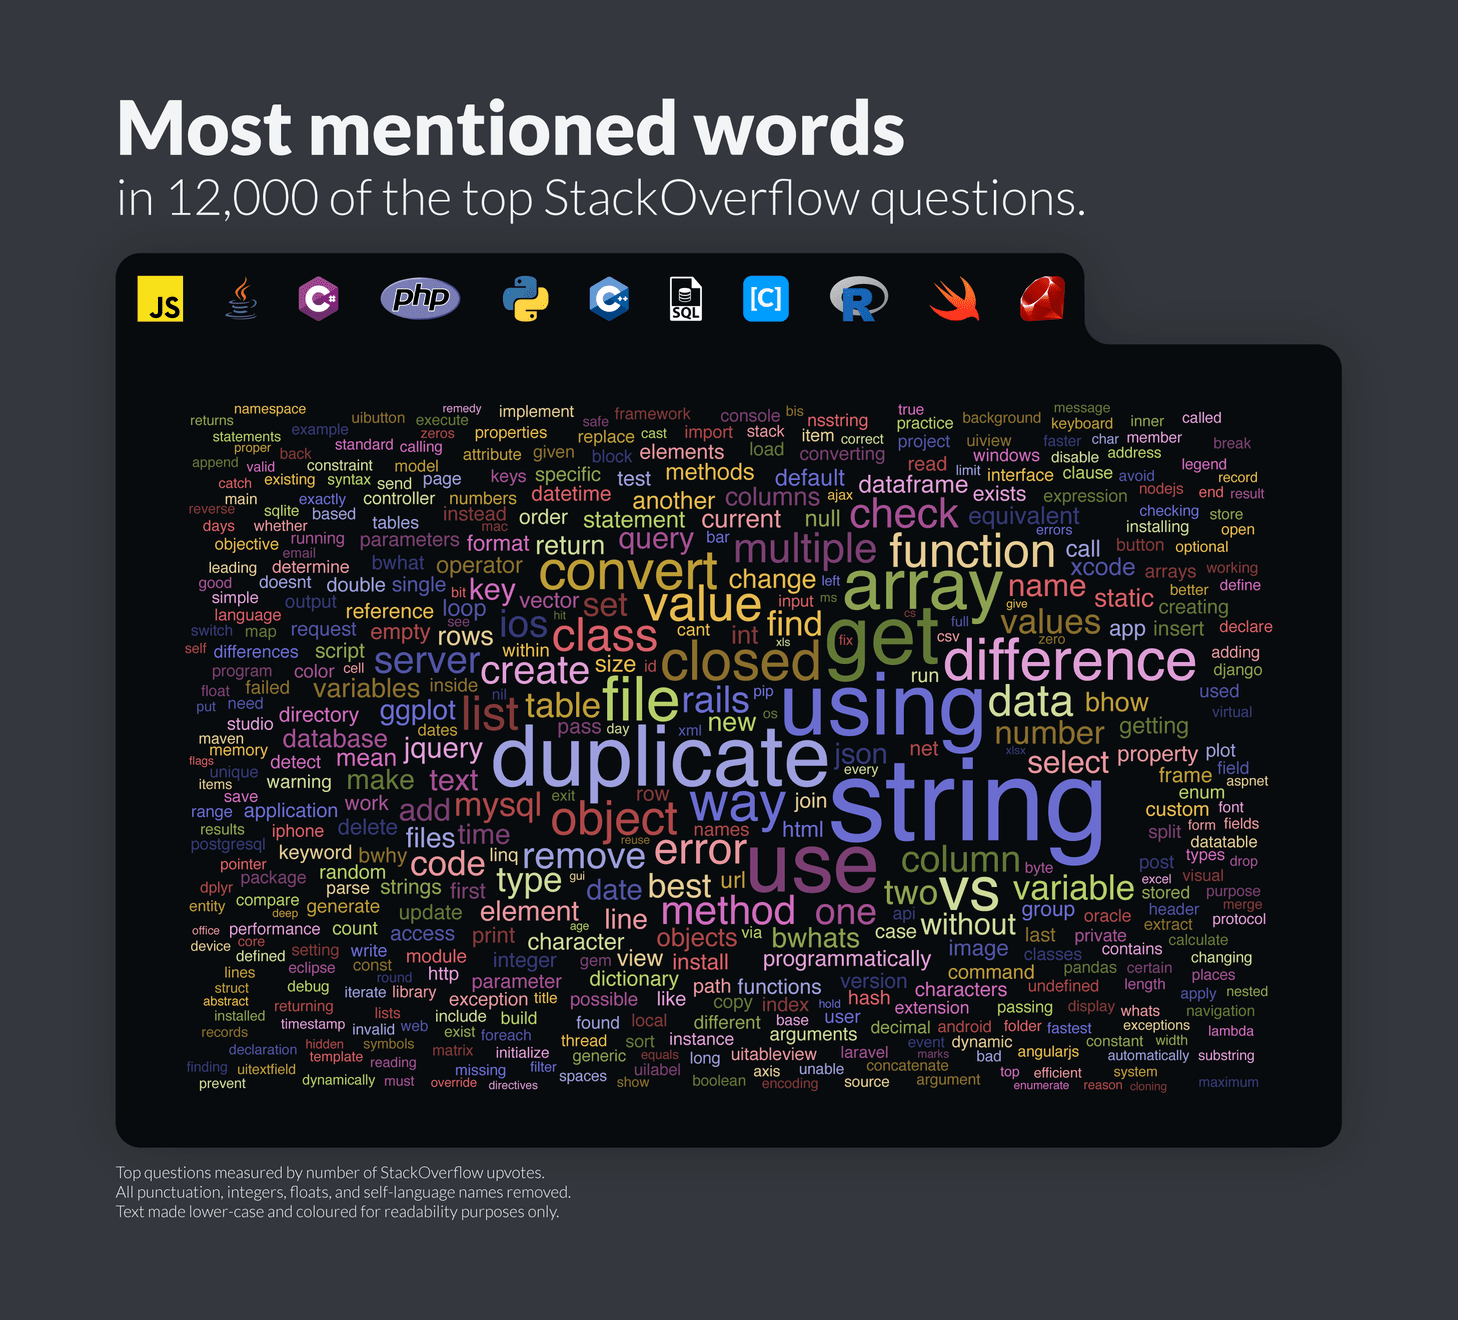 Most mentioned words for 12,000 top questions on StackOverflow.